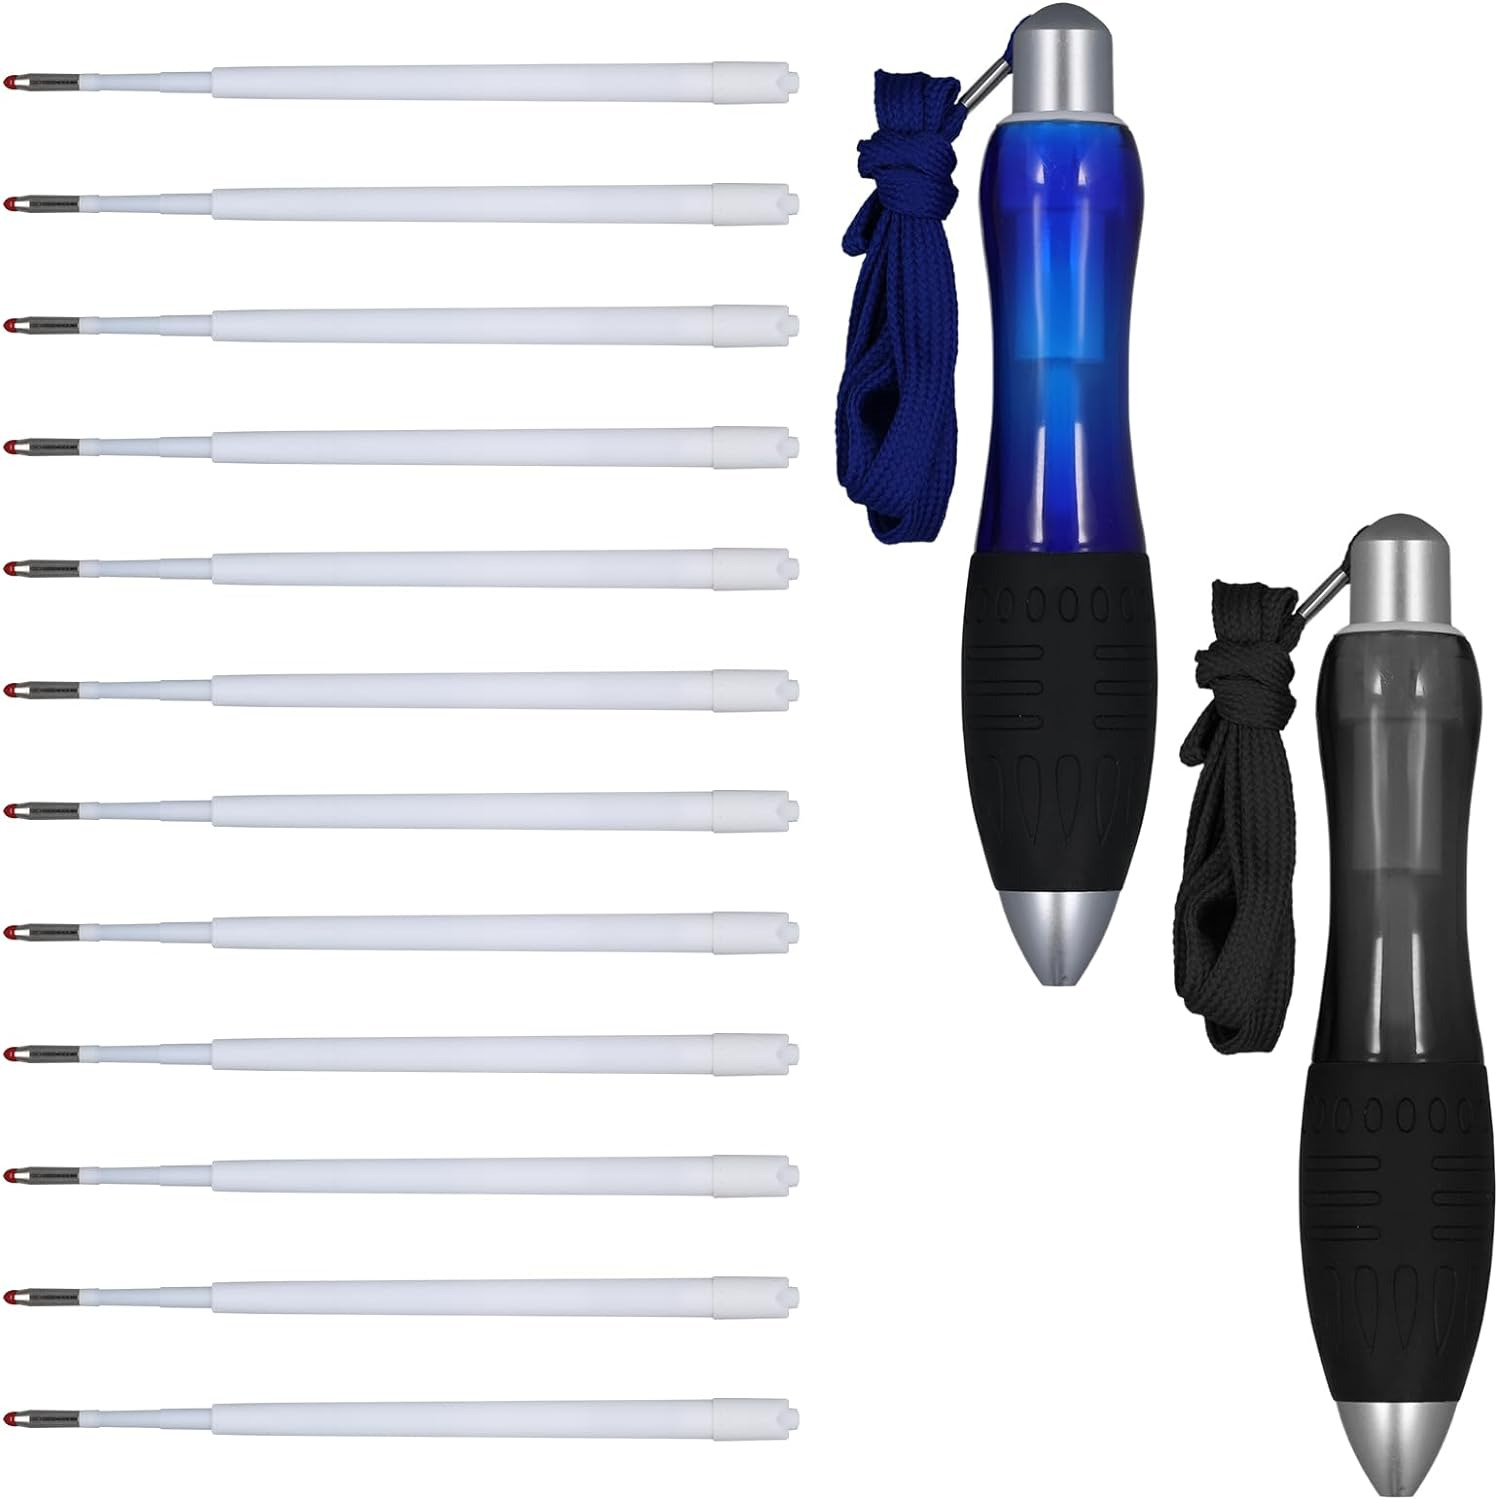 2Pcs Fat Pens with 12Pcs Refills, with 2Pcs Lanyards, Smooth Writing Big Weighte